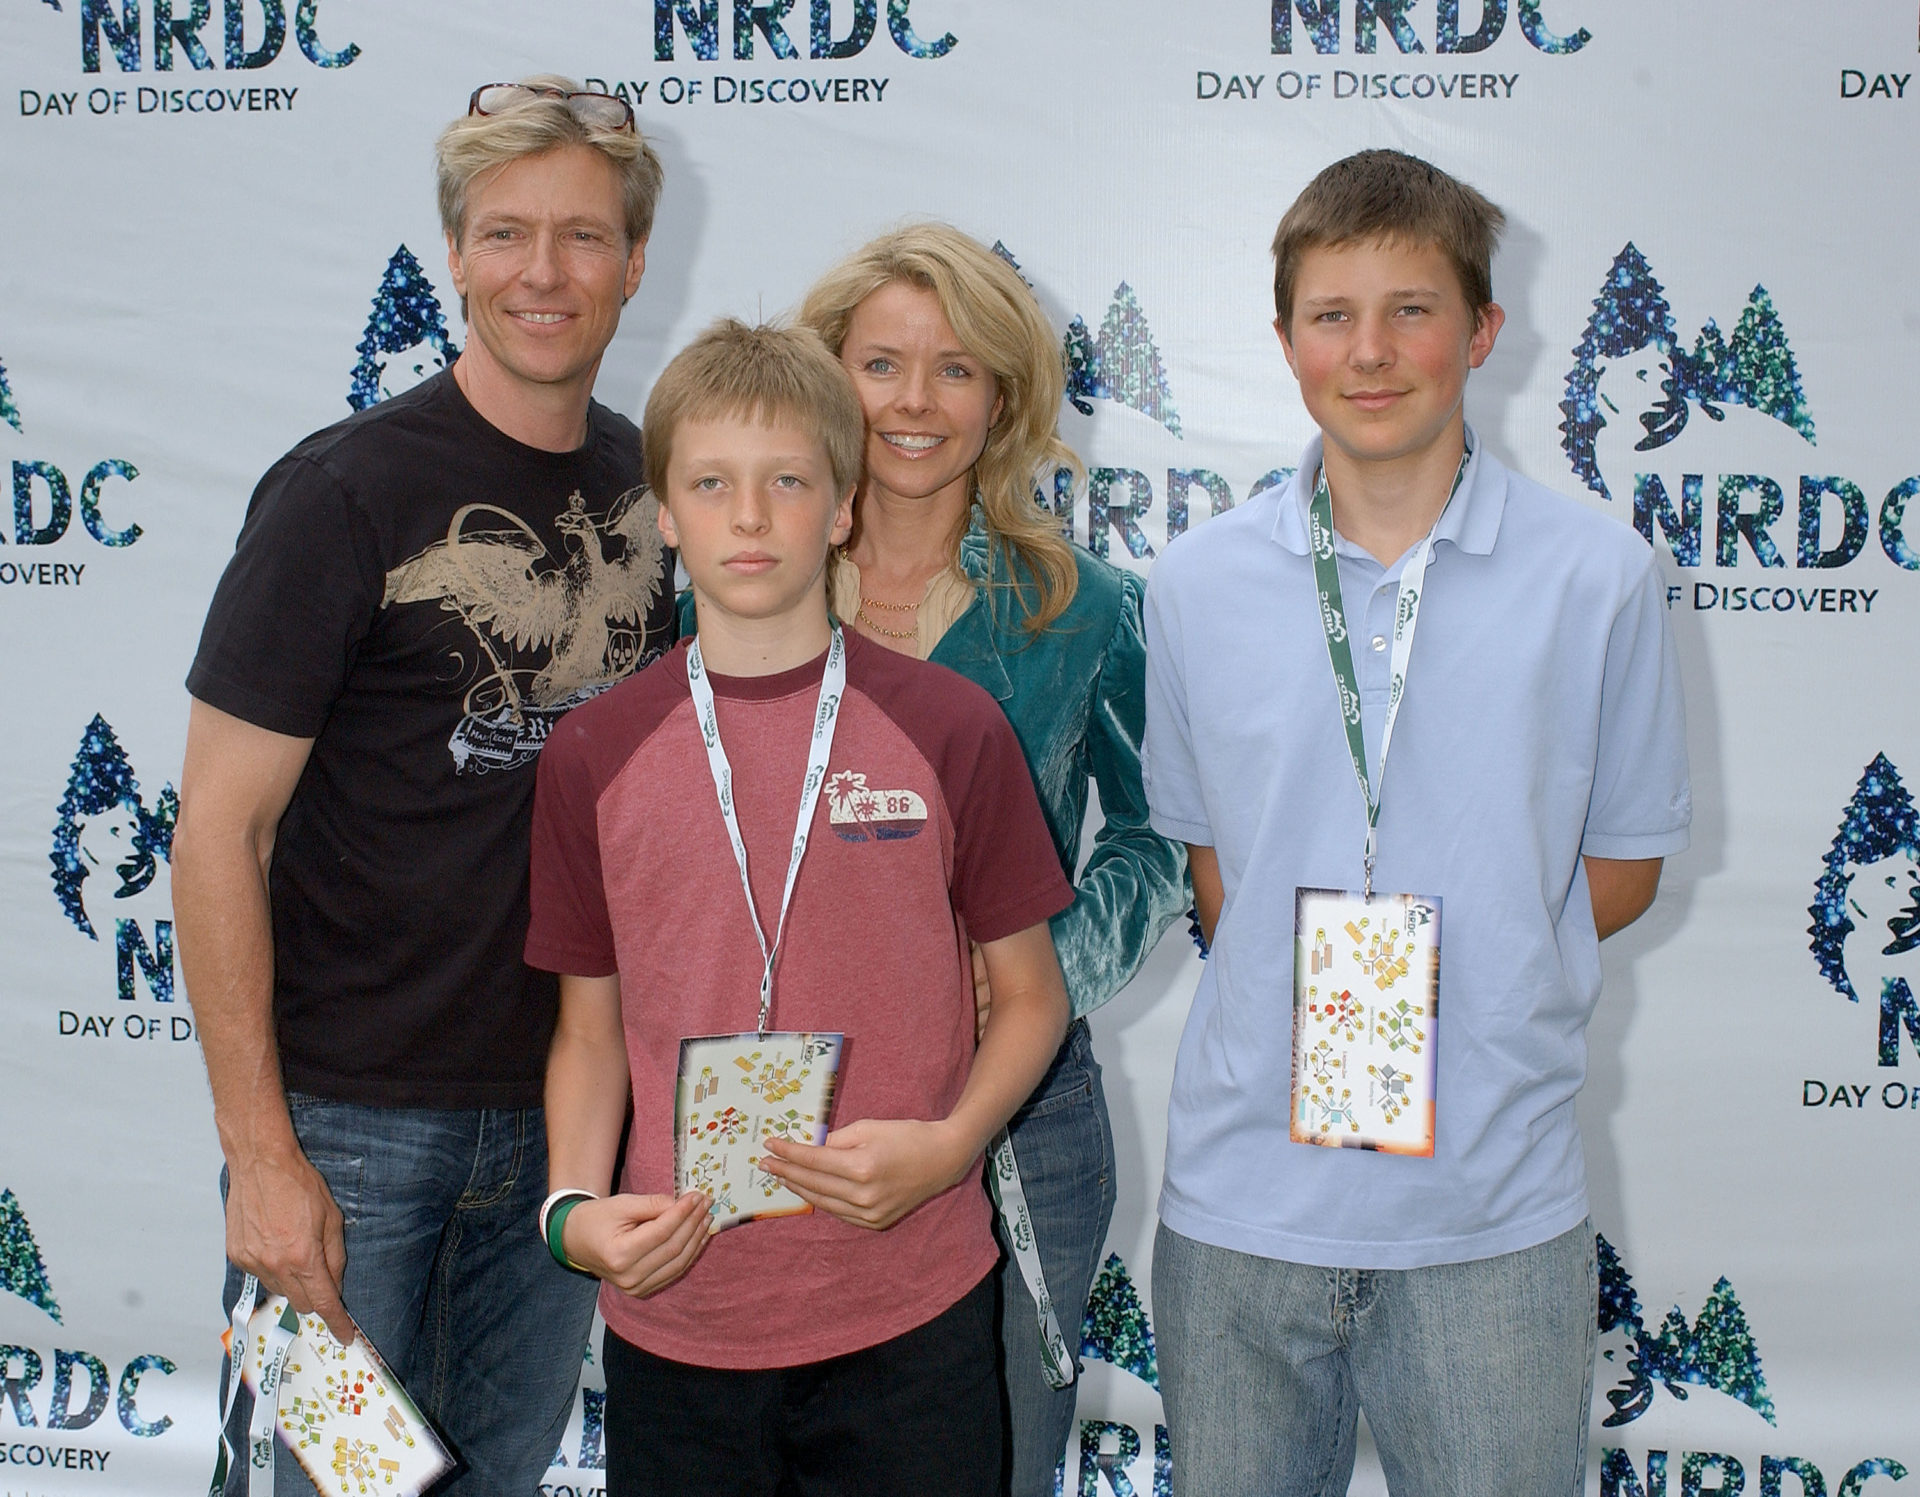 NRDC Day Of Discovery Fair - Arrivals